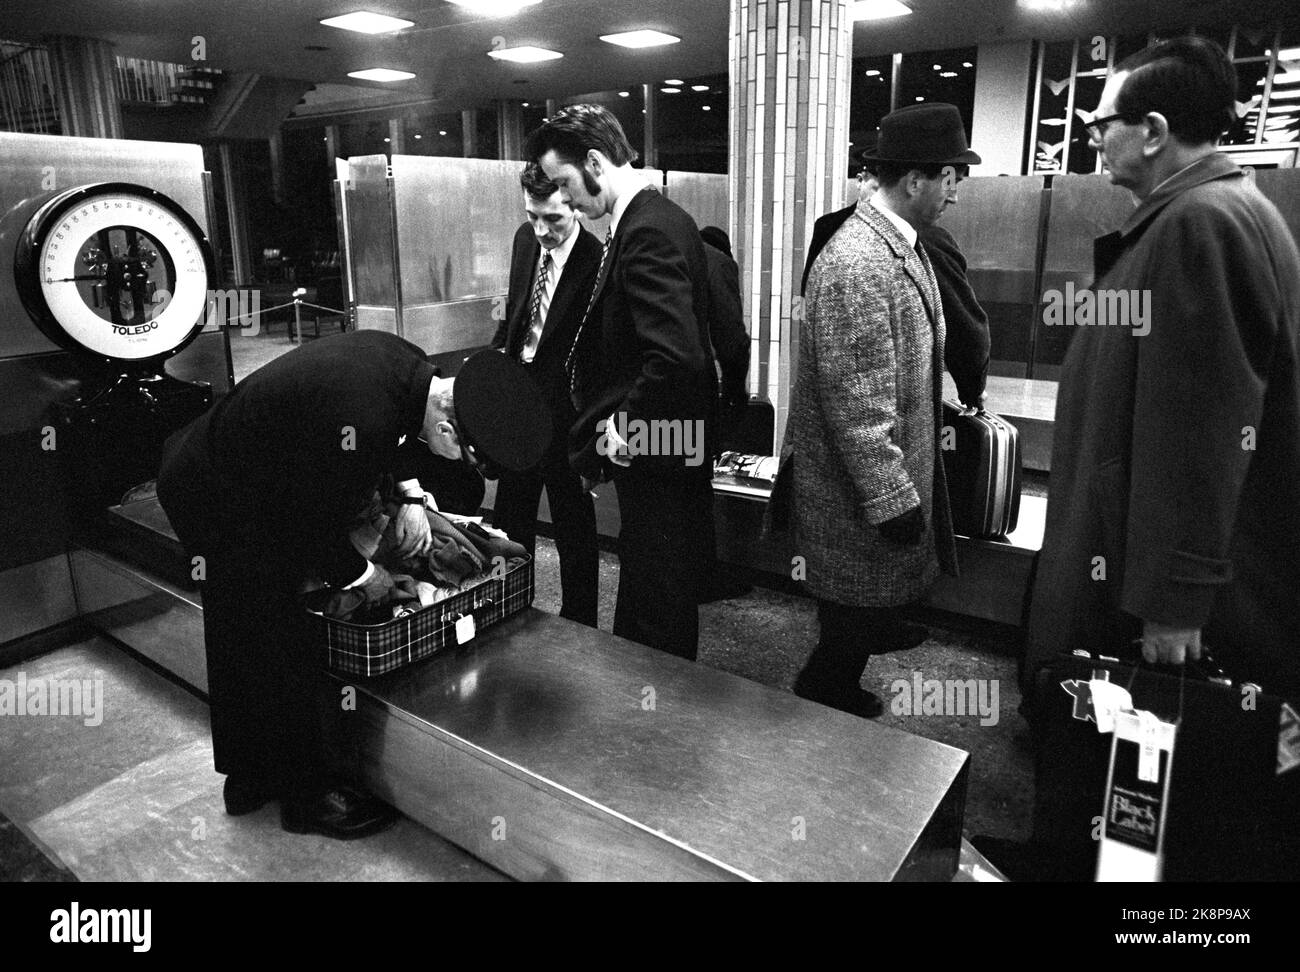 Fornebu February 1970 From Oslo Airport Fornebu. What happens at an airport during the day? Passengers on the way through customs after arrival. Toller checks a suitcase. Photo: Per Ervik / Current / NTB Stock Photo